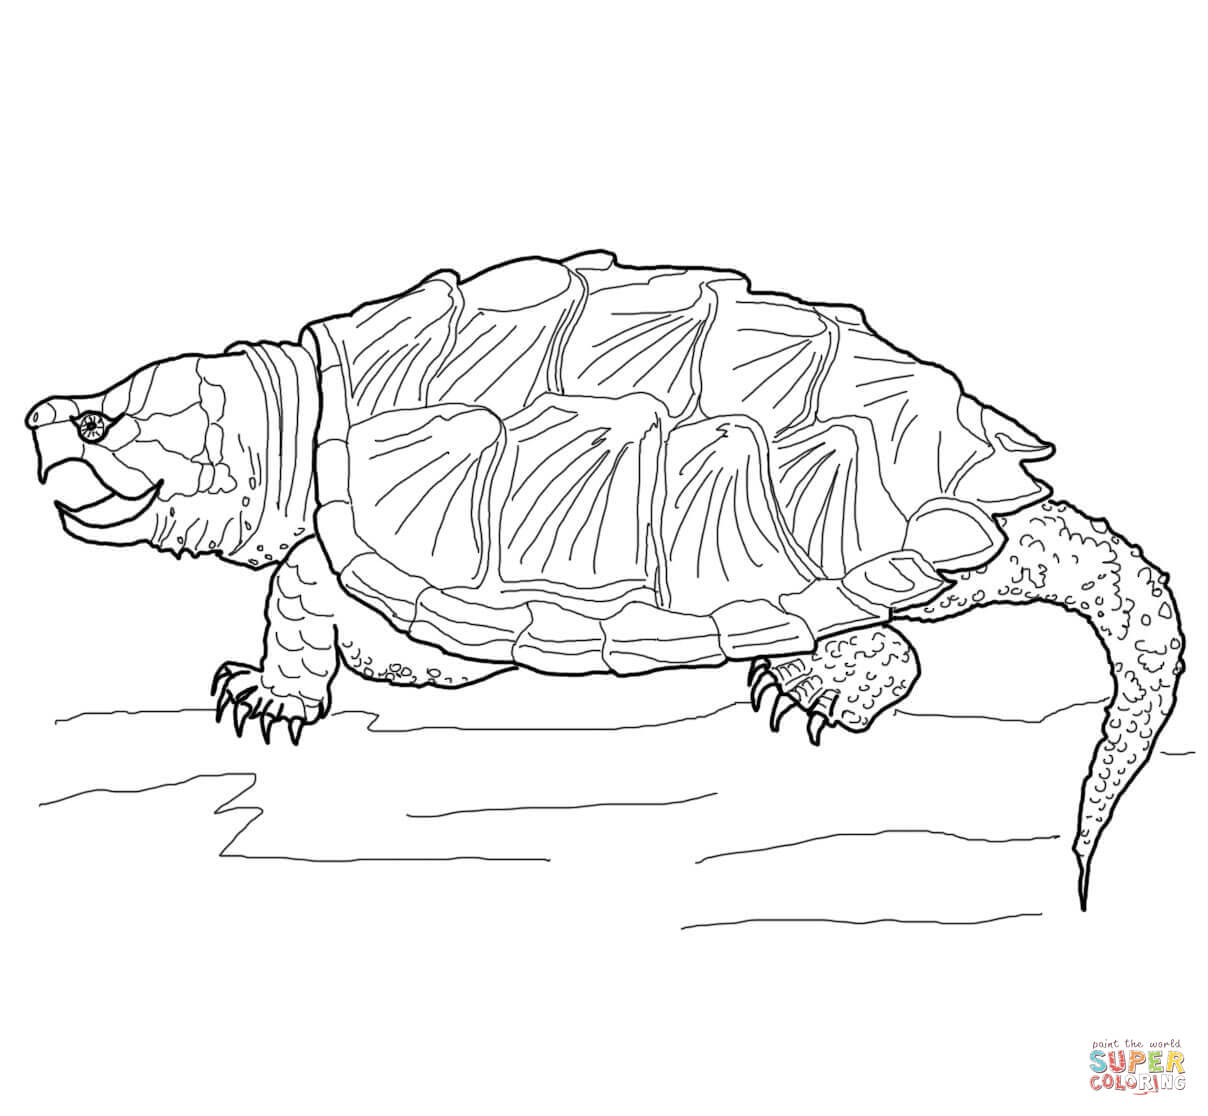 Alligator snapping turtle coloring page